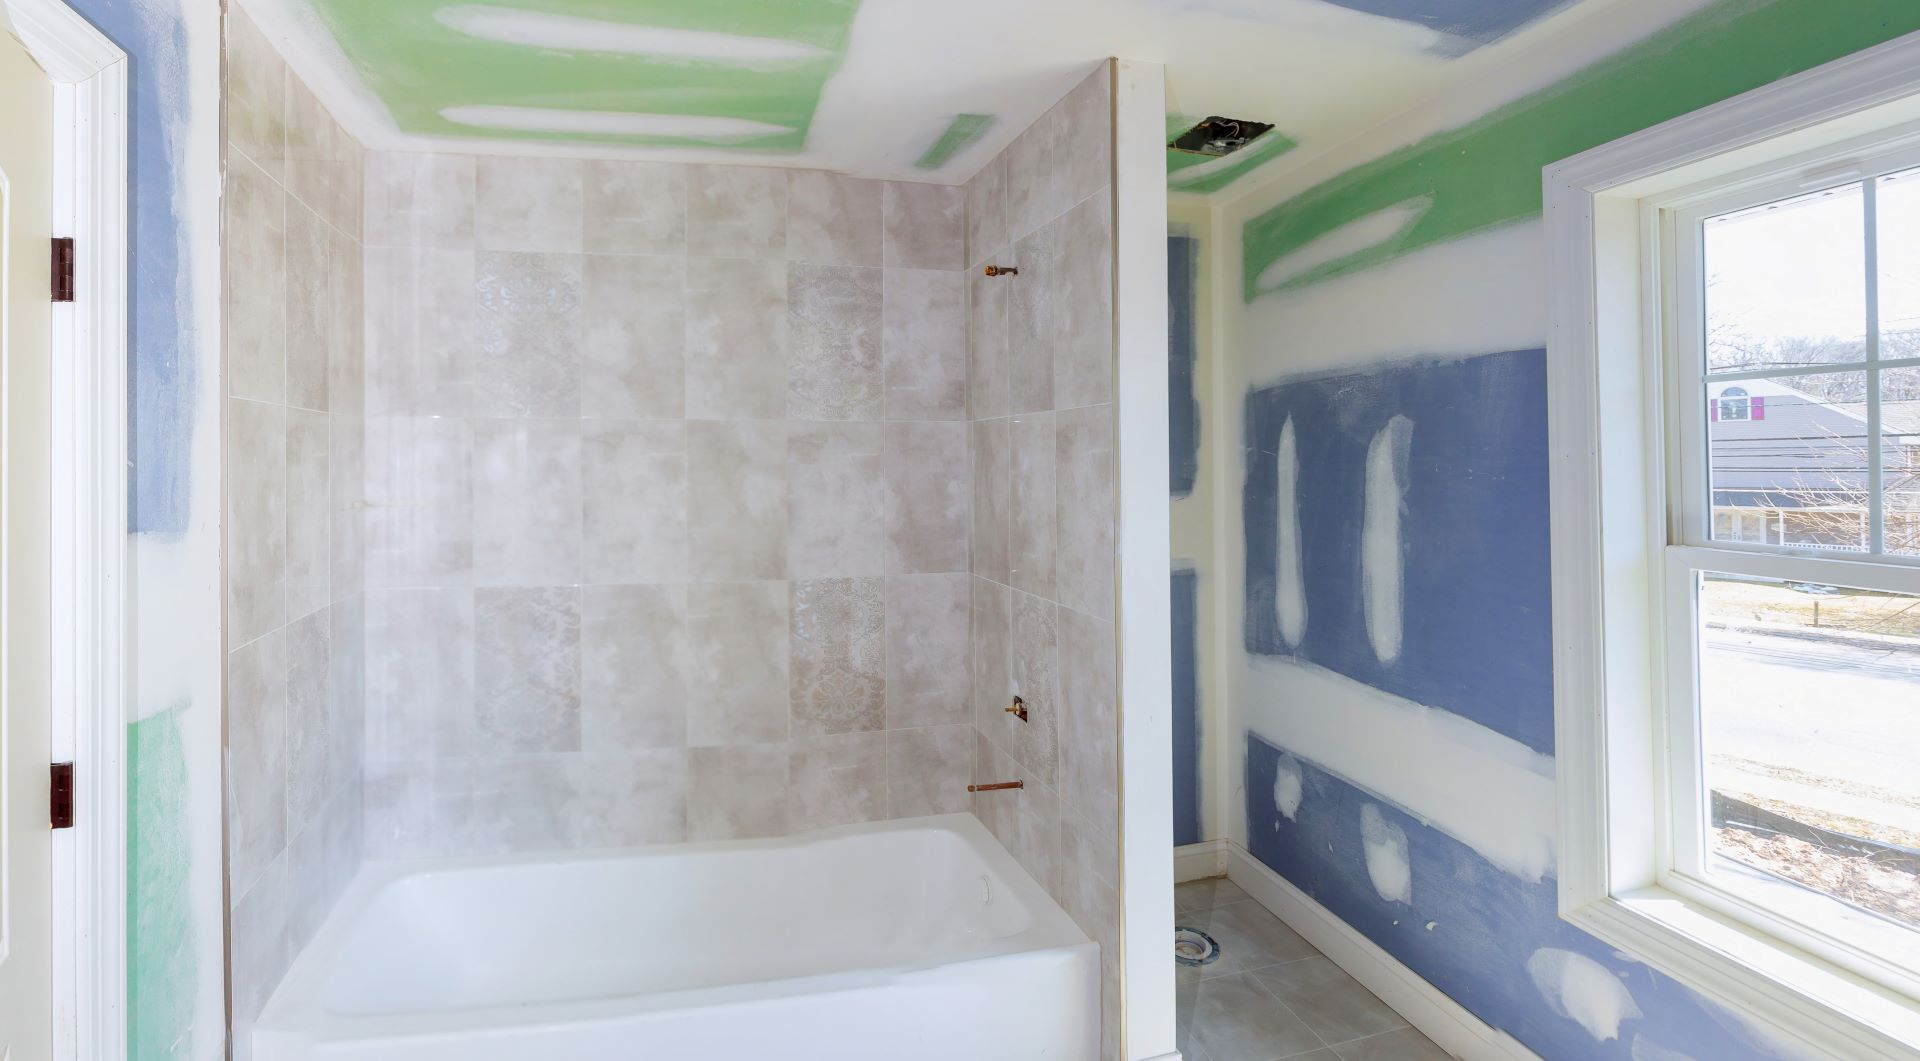 Bathroom remodel progresses as drywall is smoothed, covering seams and screws with tape and spackle mud